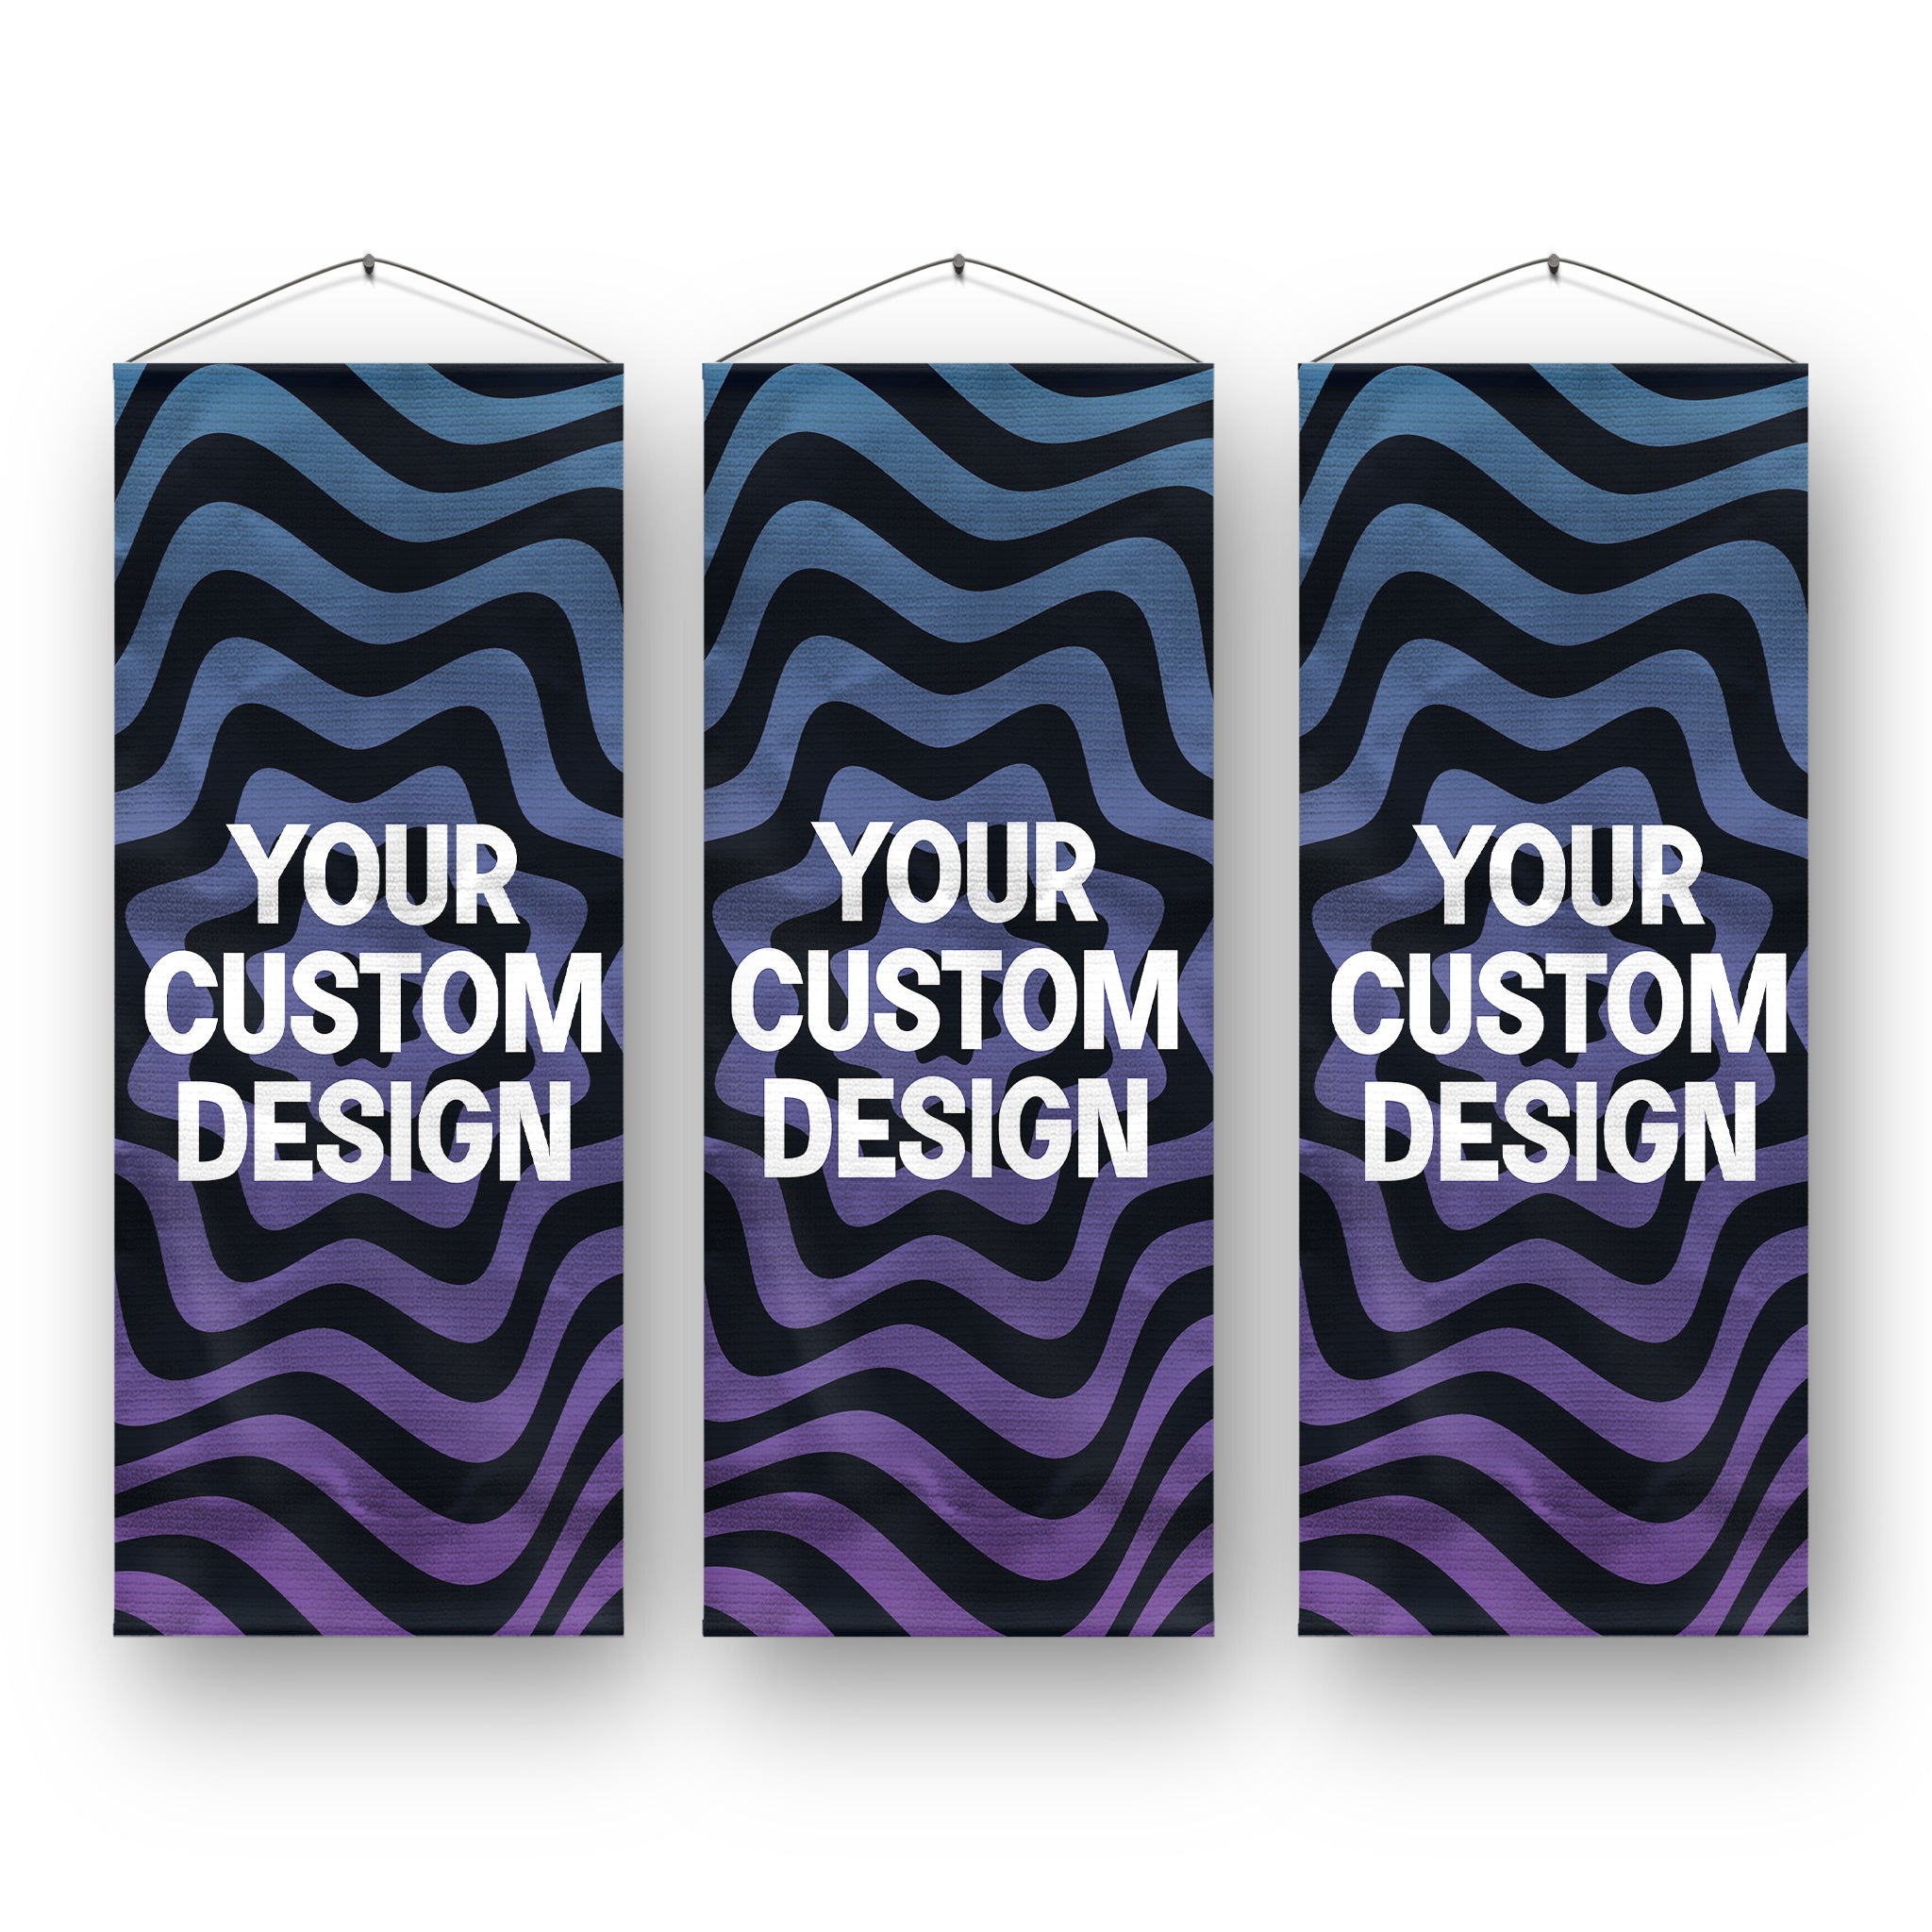 Hanging Canvas Set of 3 - Make Your Own